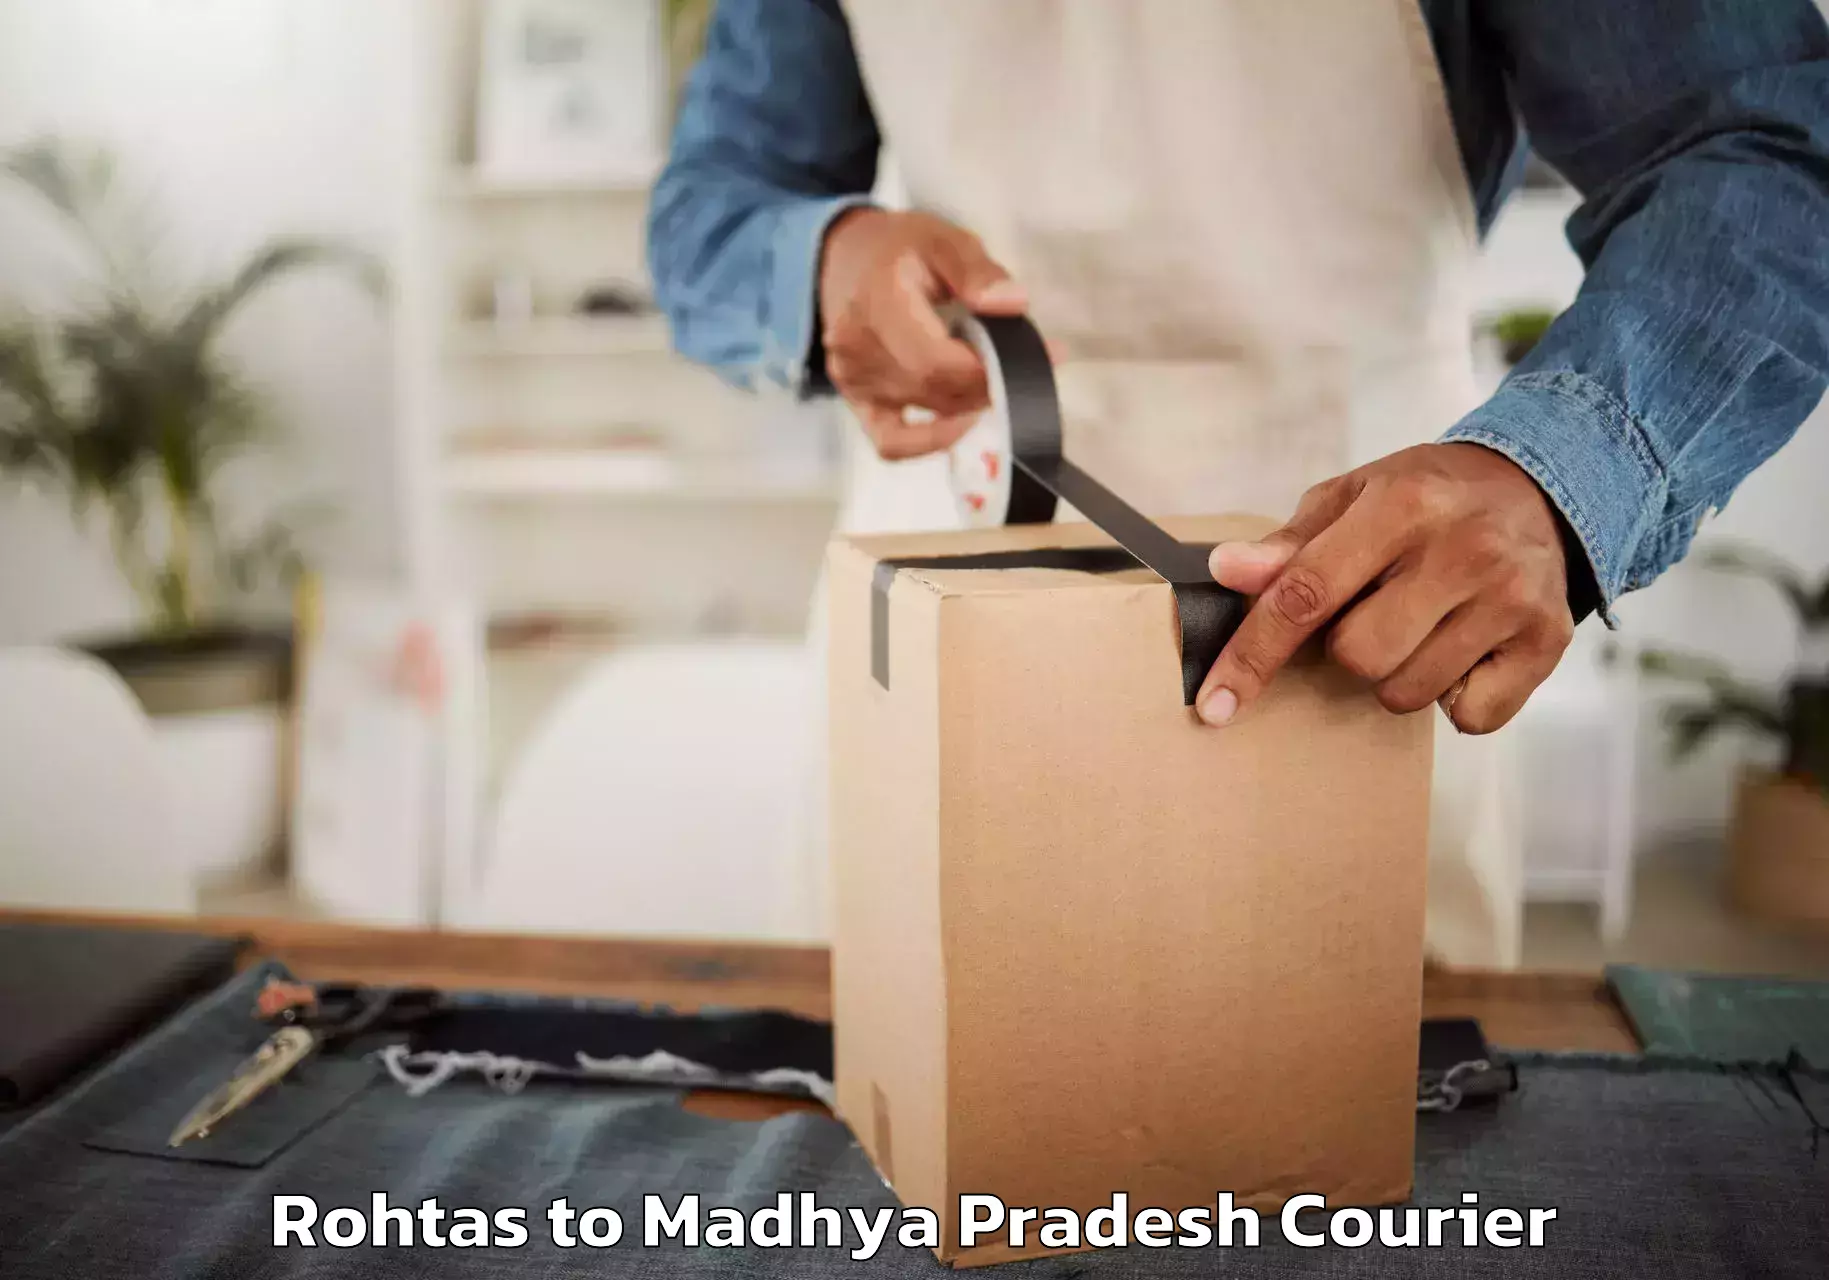 Professional moving company Rohtas to Dhamnod